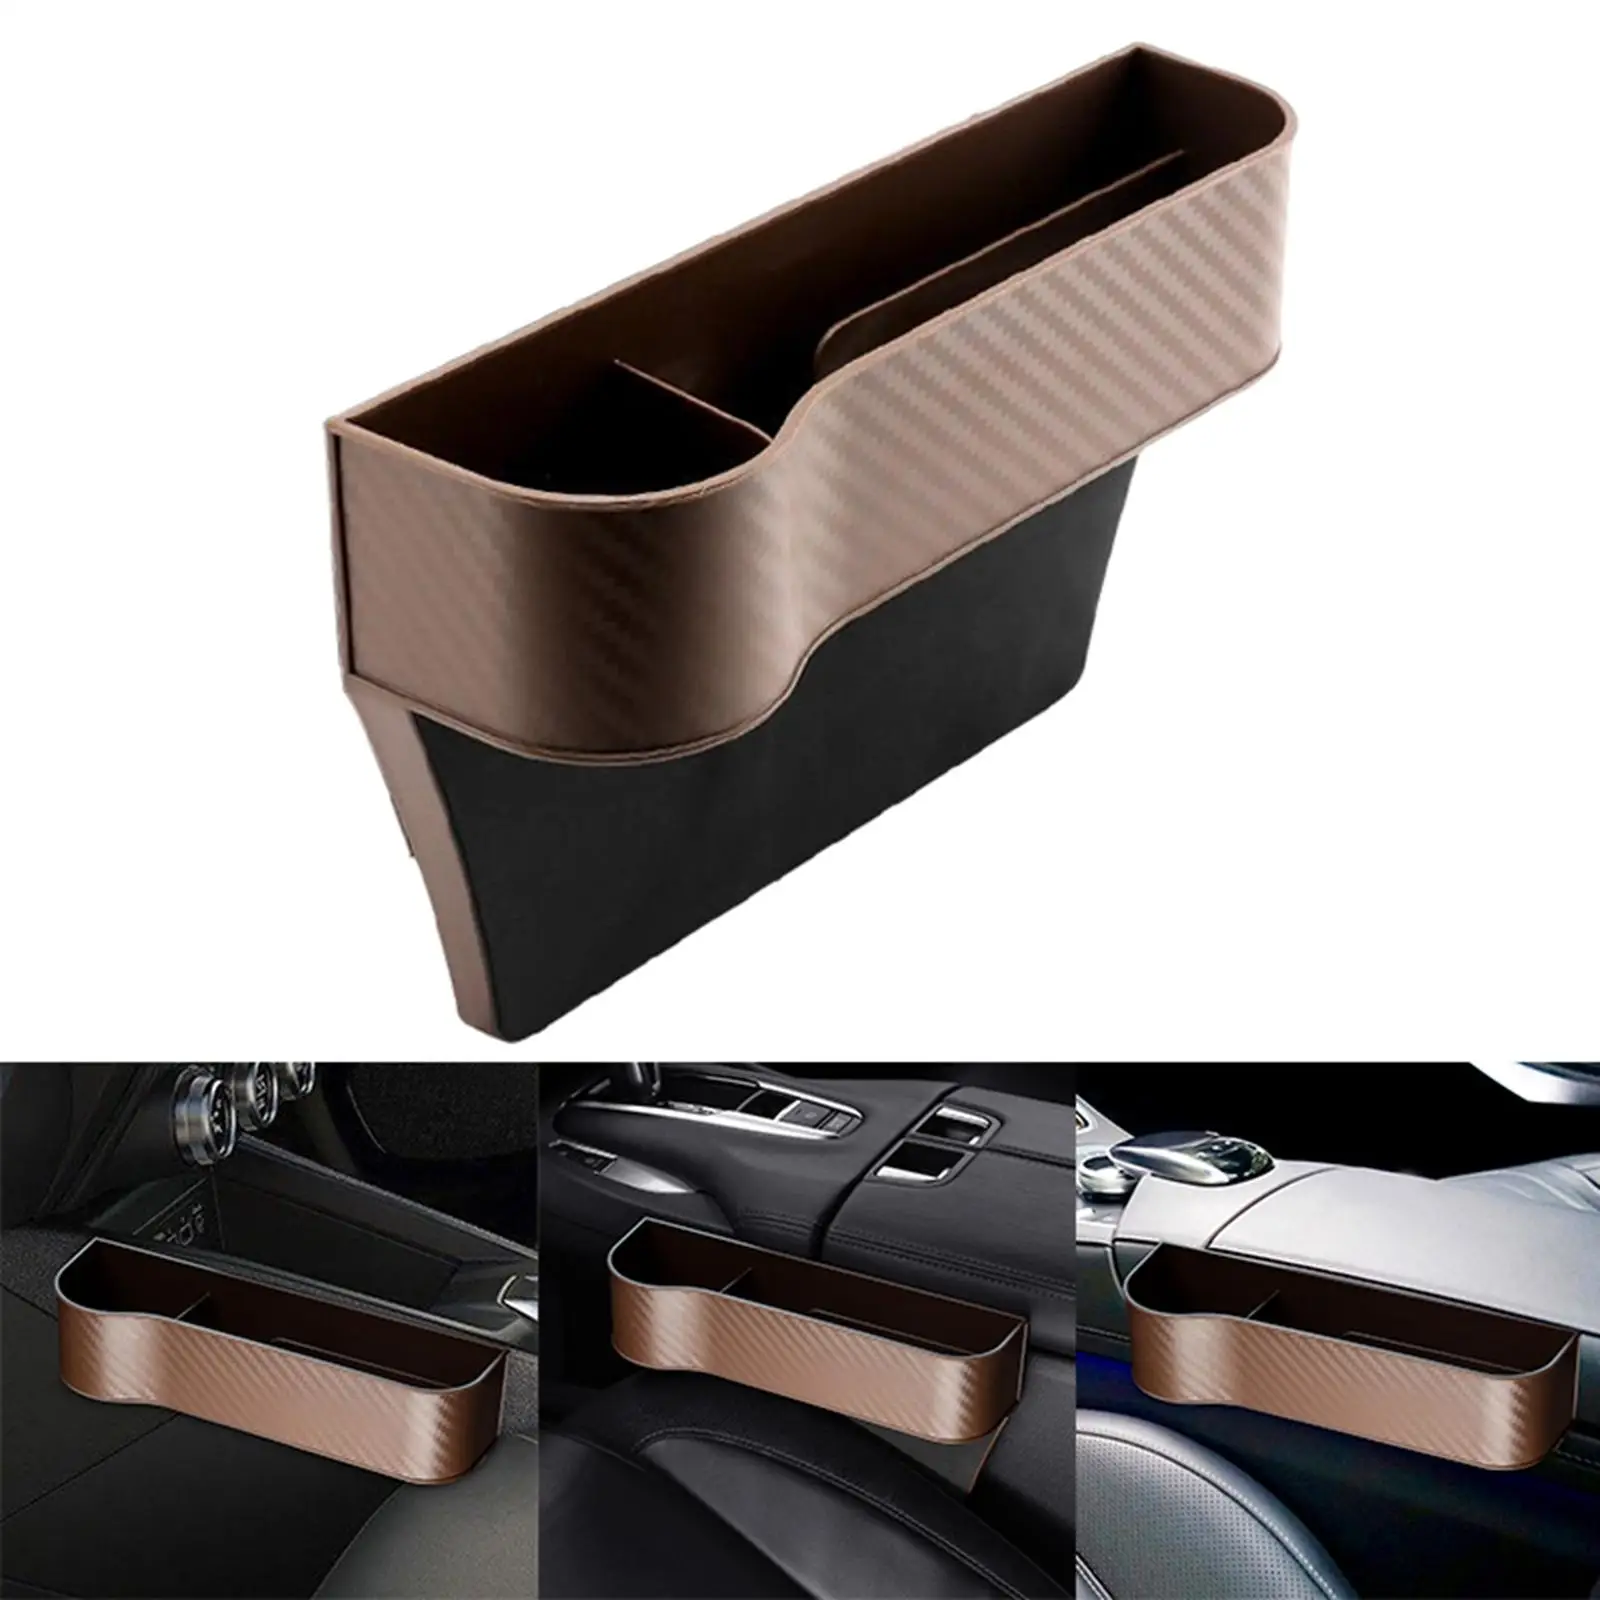 Automobile Car Seat Gap Filler Organizer Multifunctions Accessories Made of ABS Plastic Console Side Organizer Expand Space